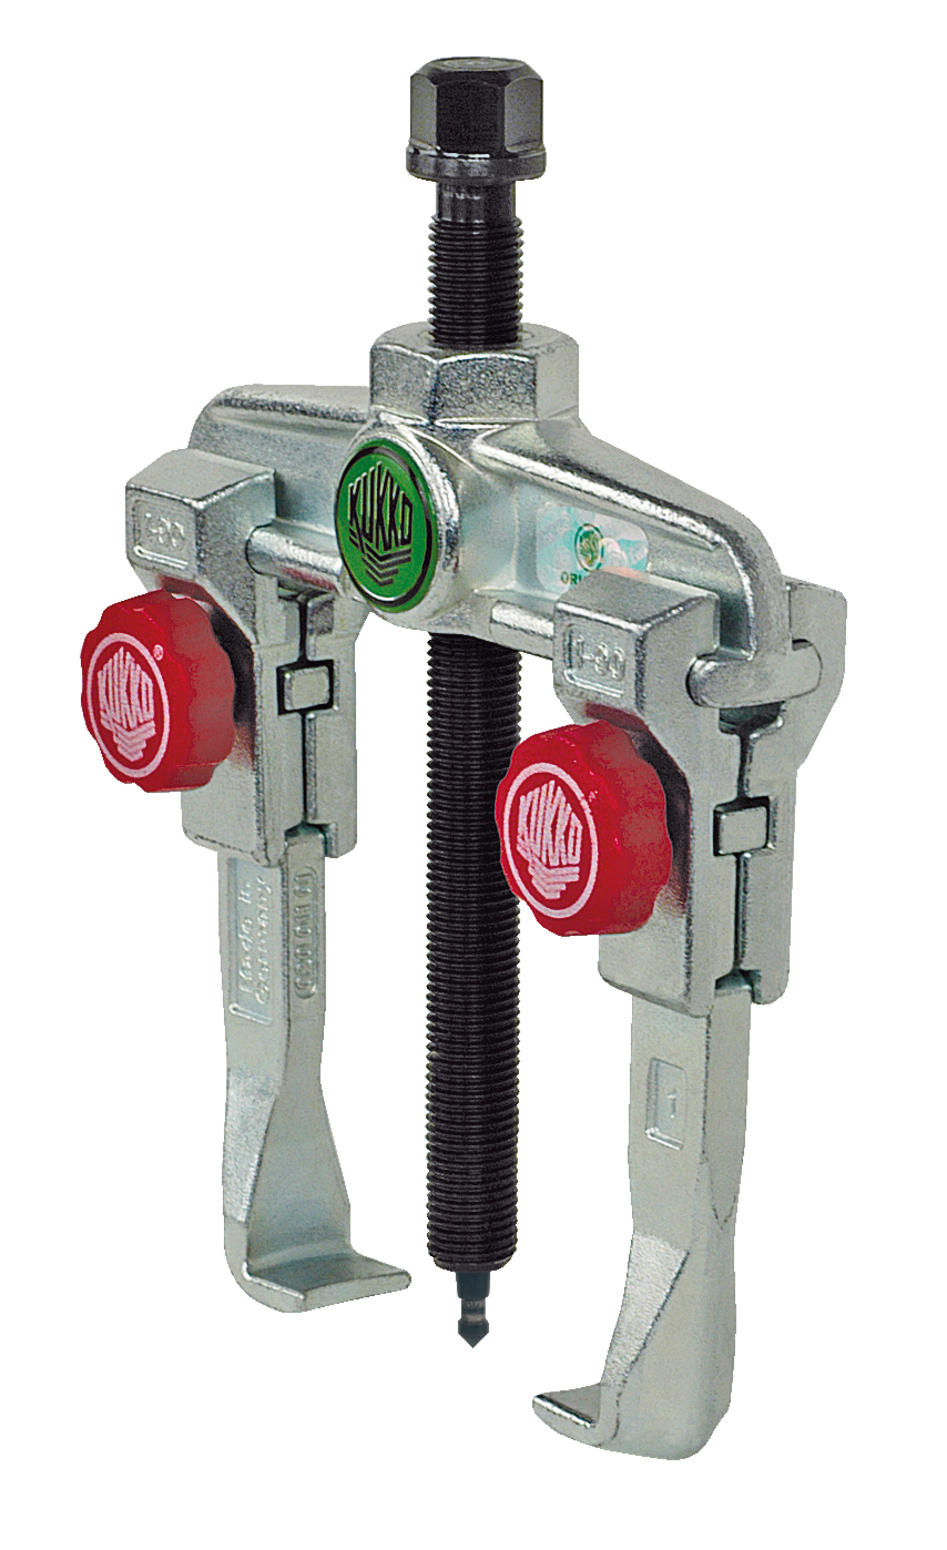 The 2-jaw universal puller 20+ with quickly adjustable pulling jaws